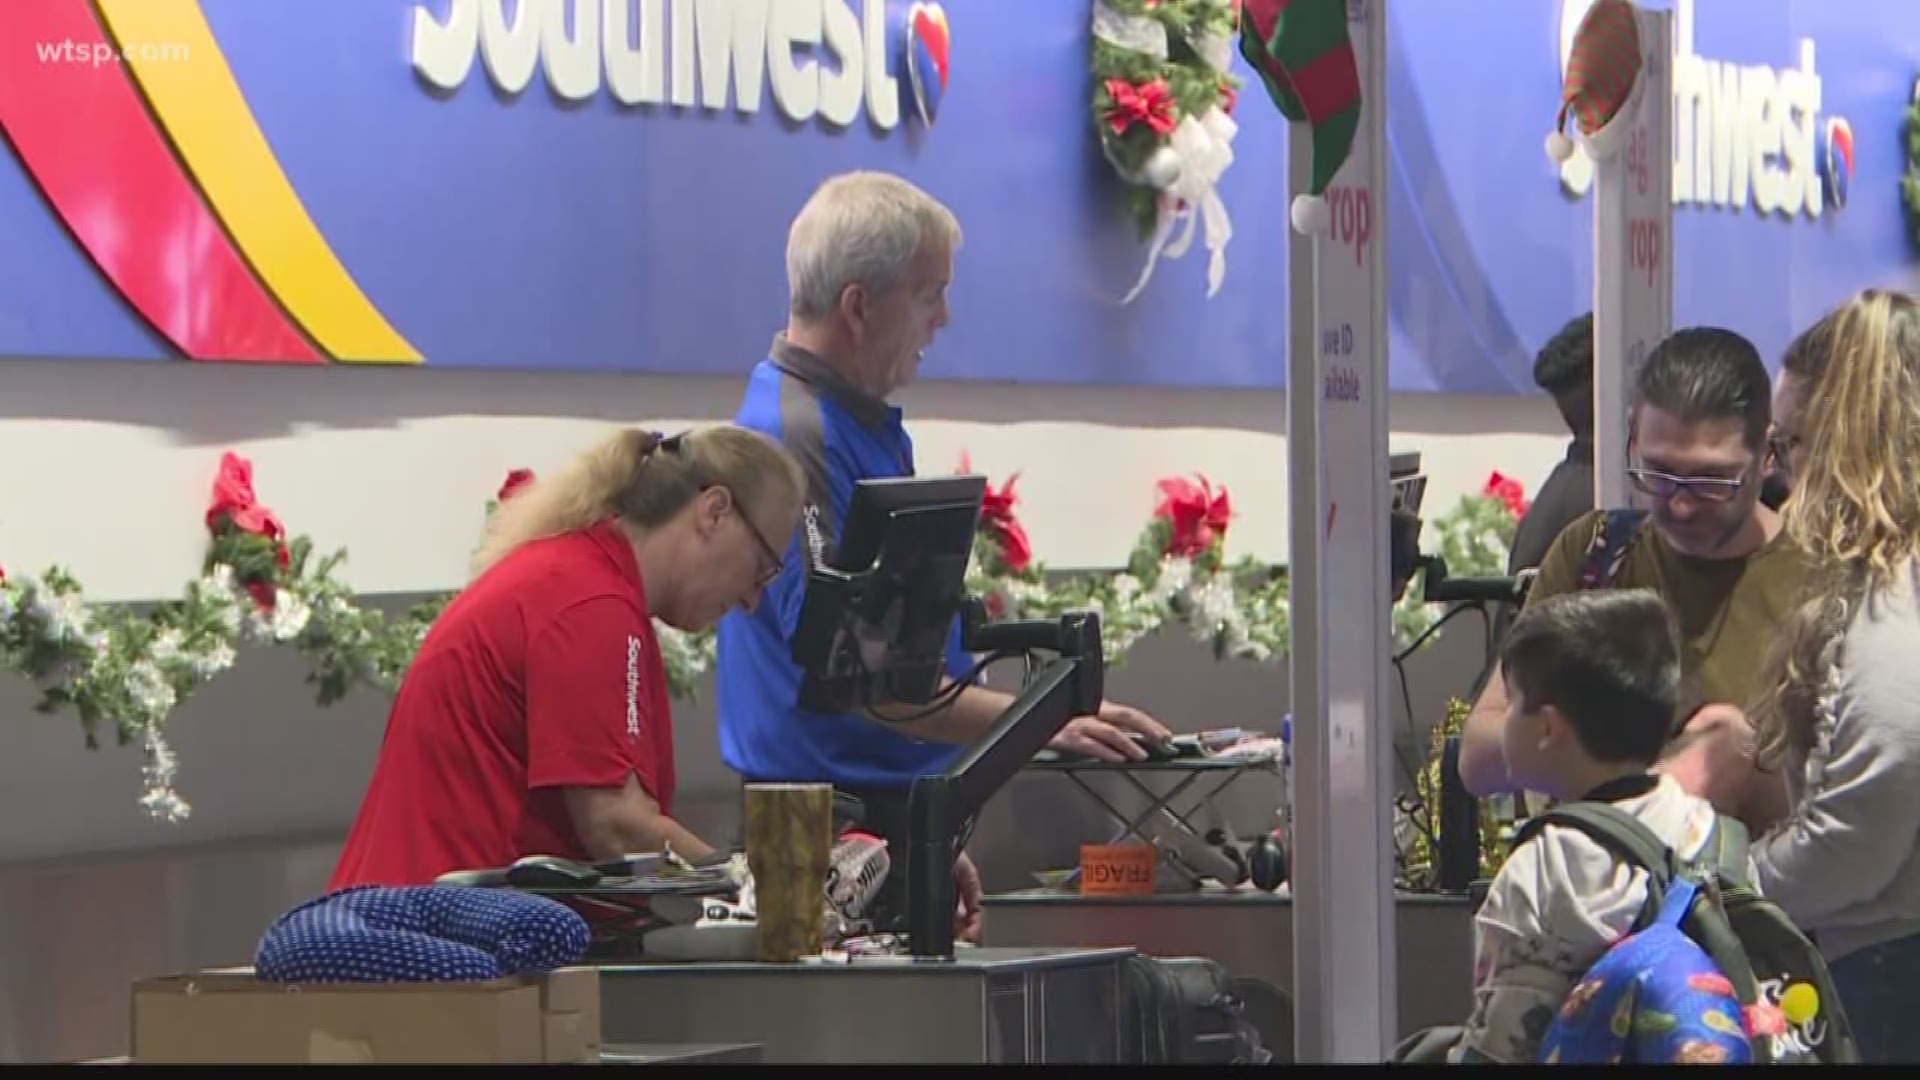 Dec. 30 is expected to be one of the busiest days of the year with 89,000 people coming through the airport.